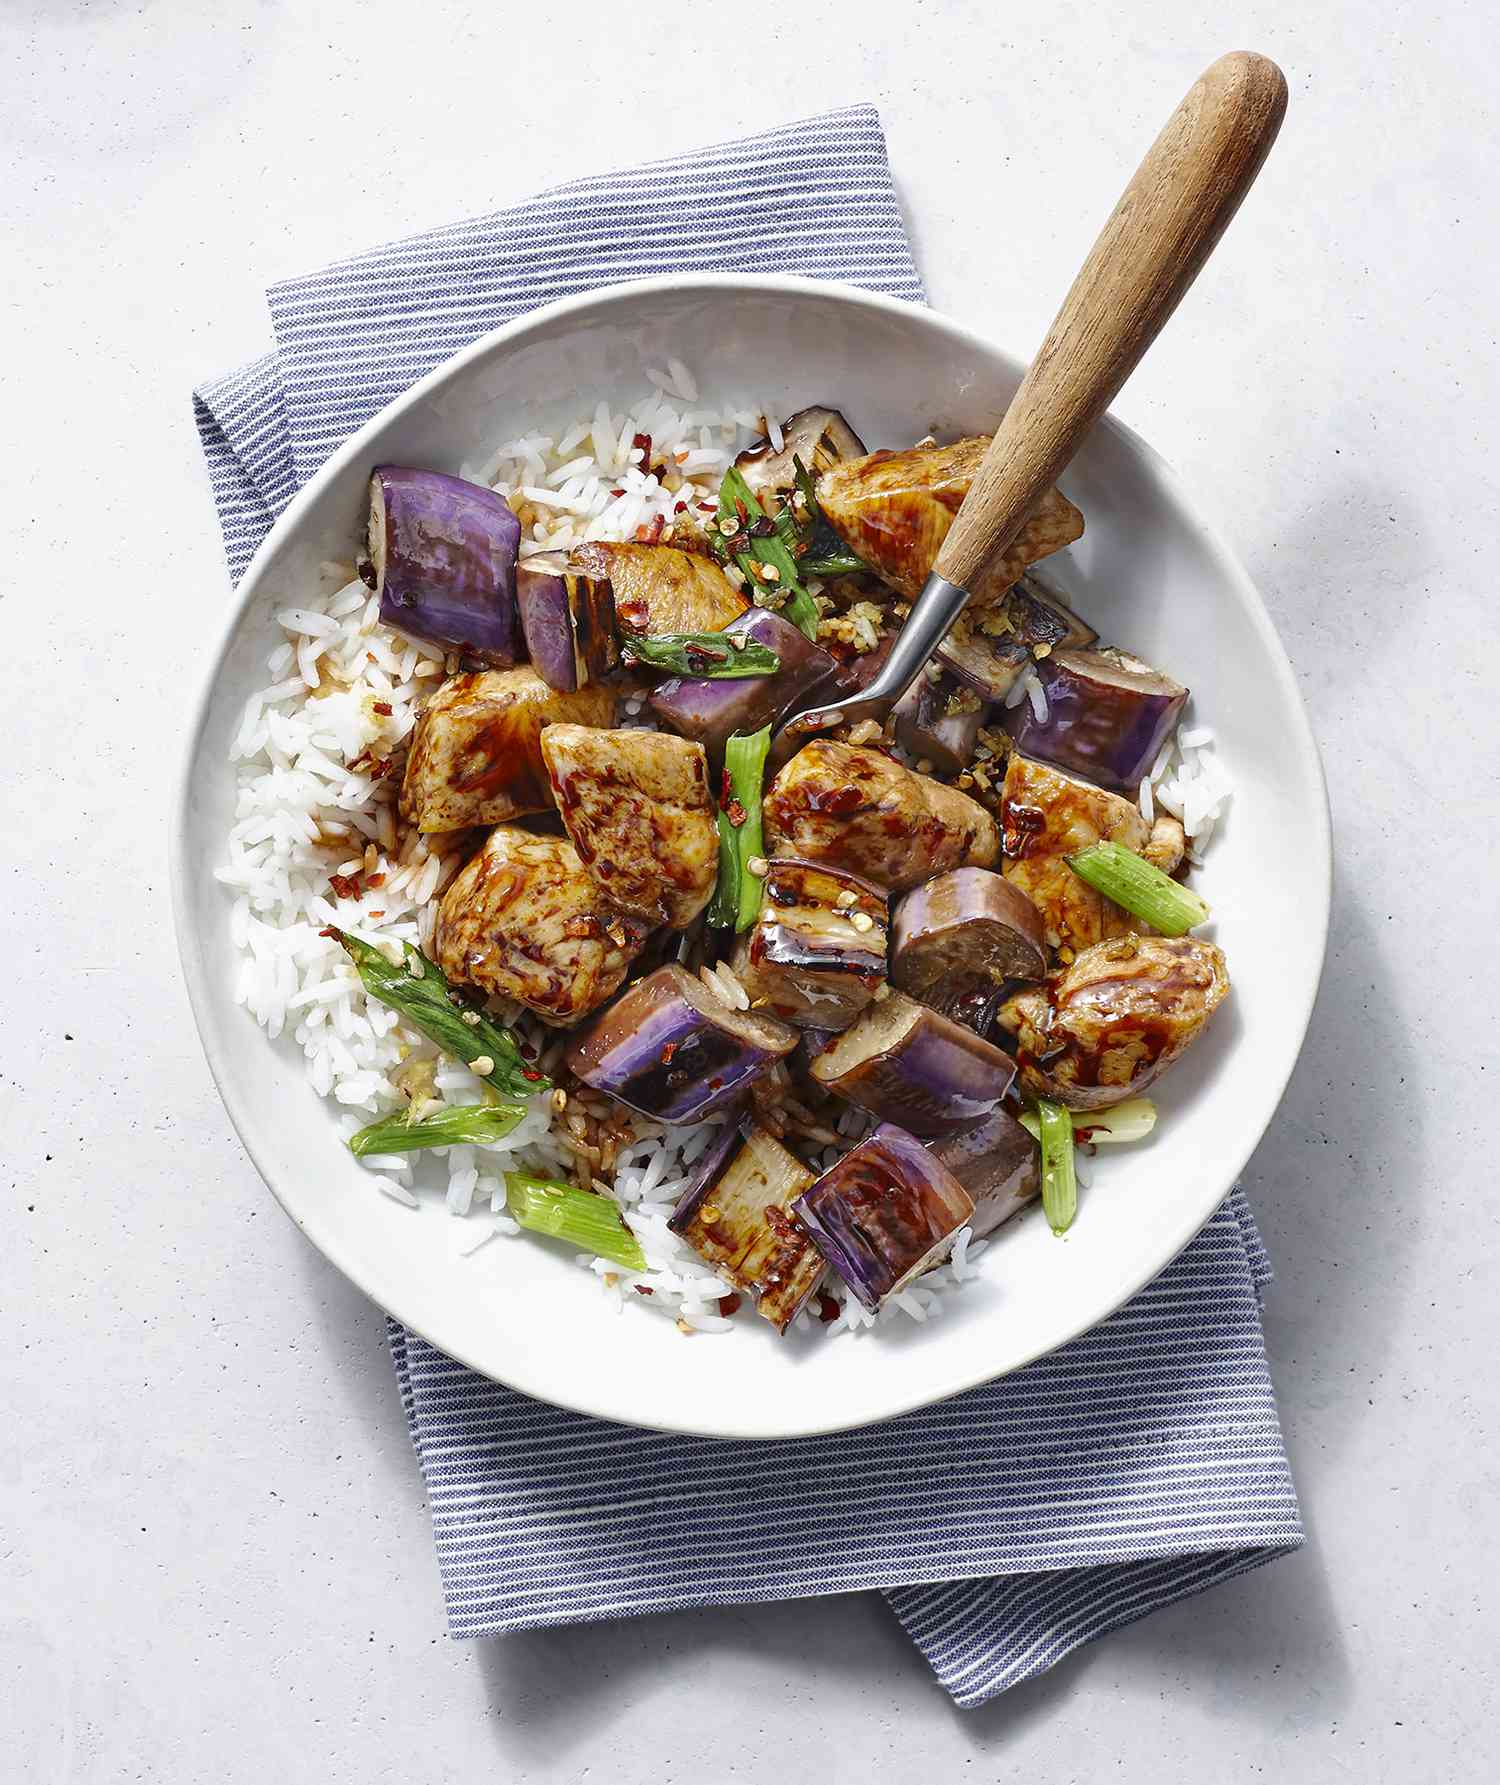 Spicy Chicken and Eggplant Stir-Fry